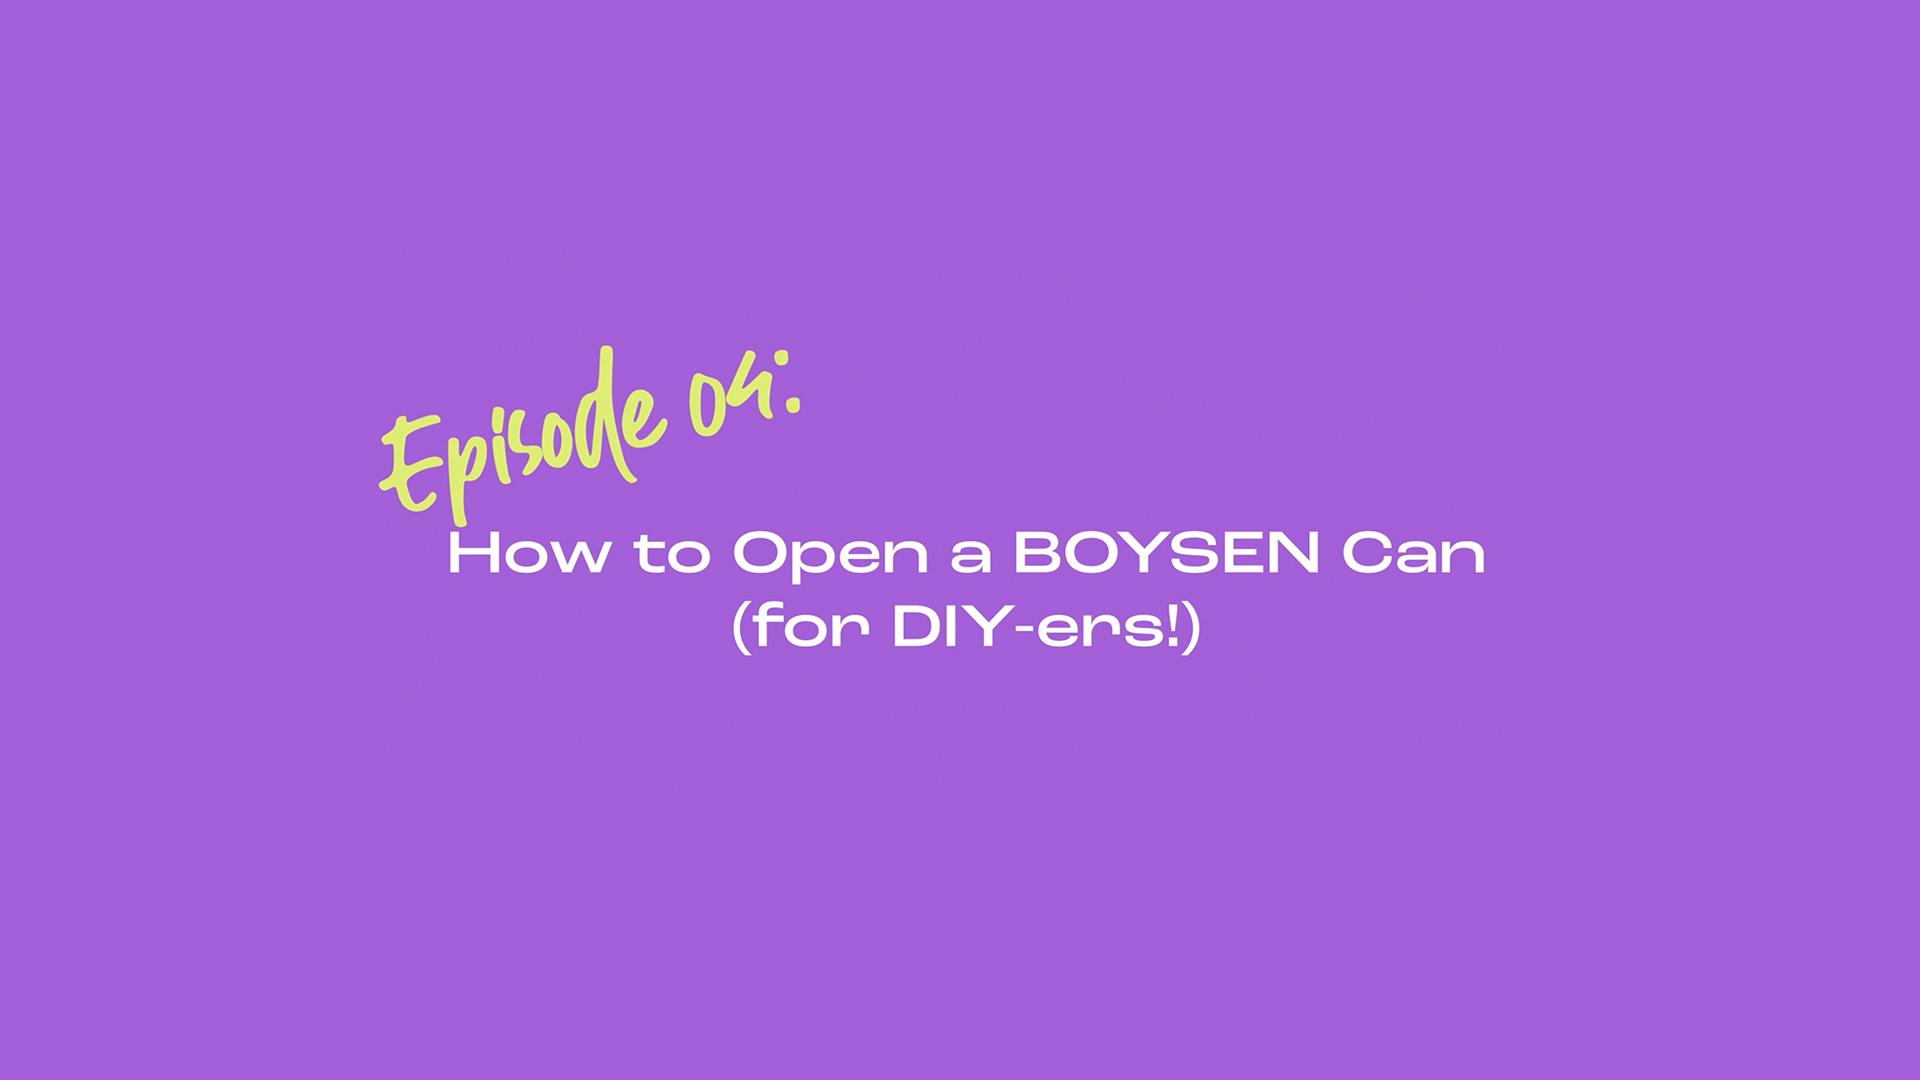 Painting It Easy
How to Open a BOYSEN Can (for DIY-ers!)